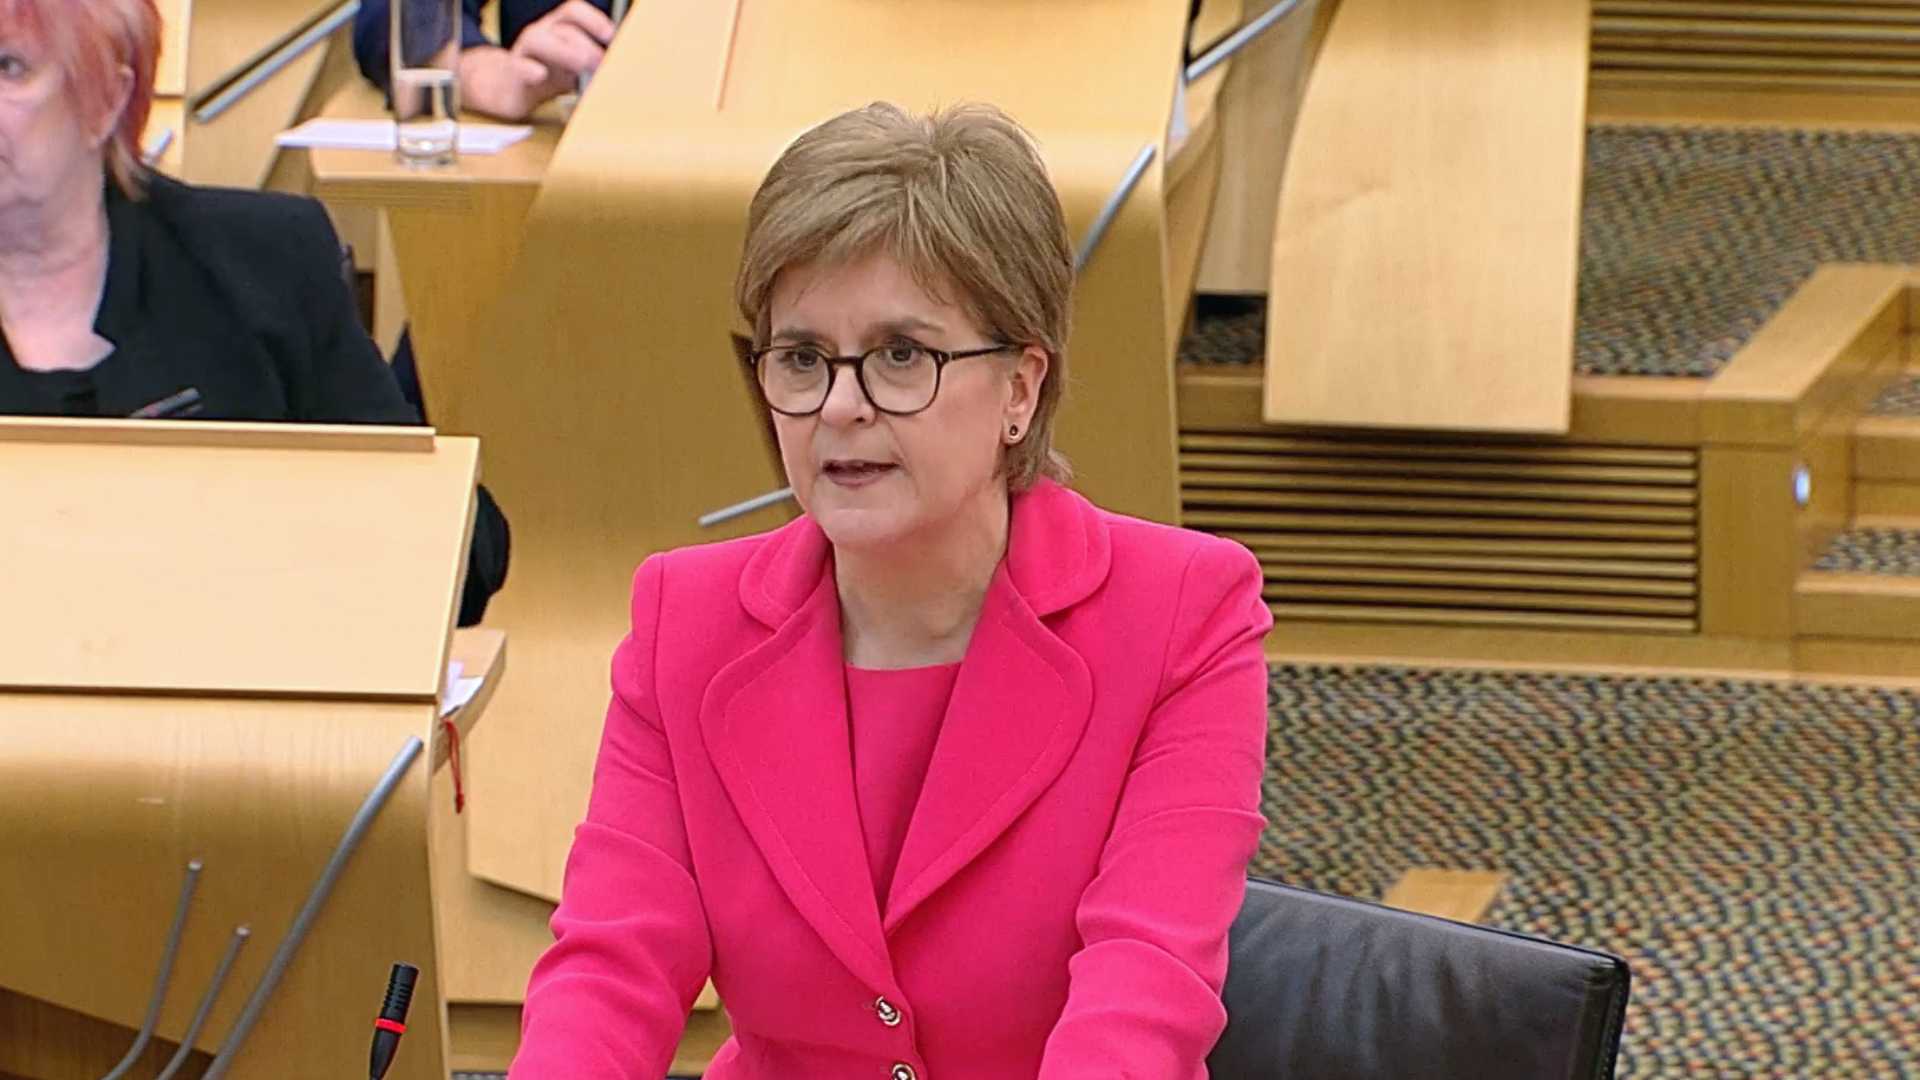 Nicola Sturgeon's plans for national care service have faced widespread criticism